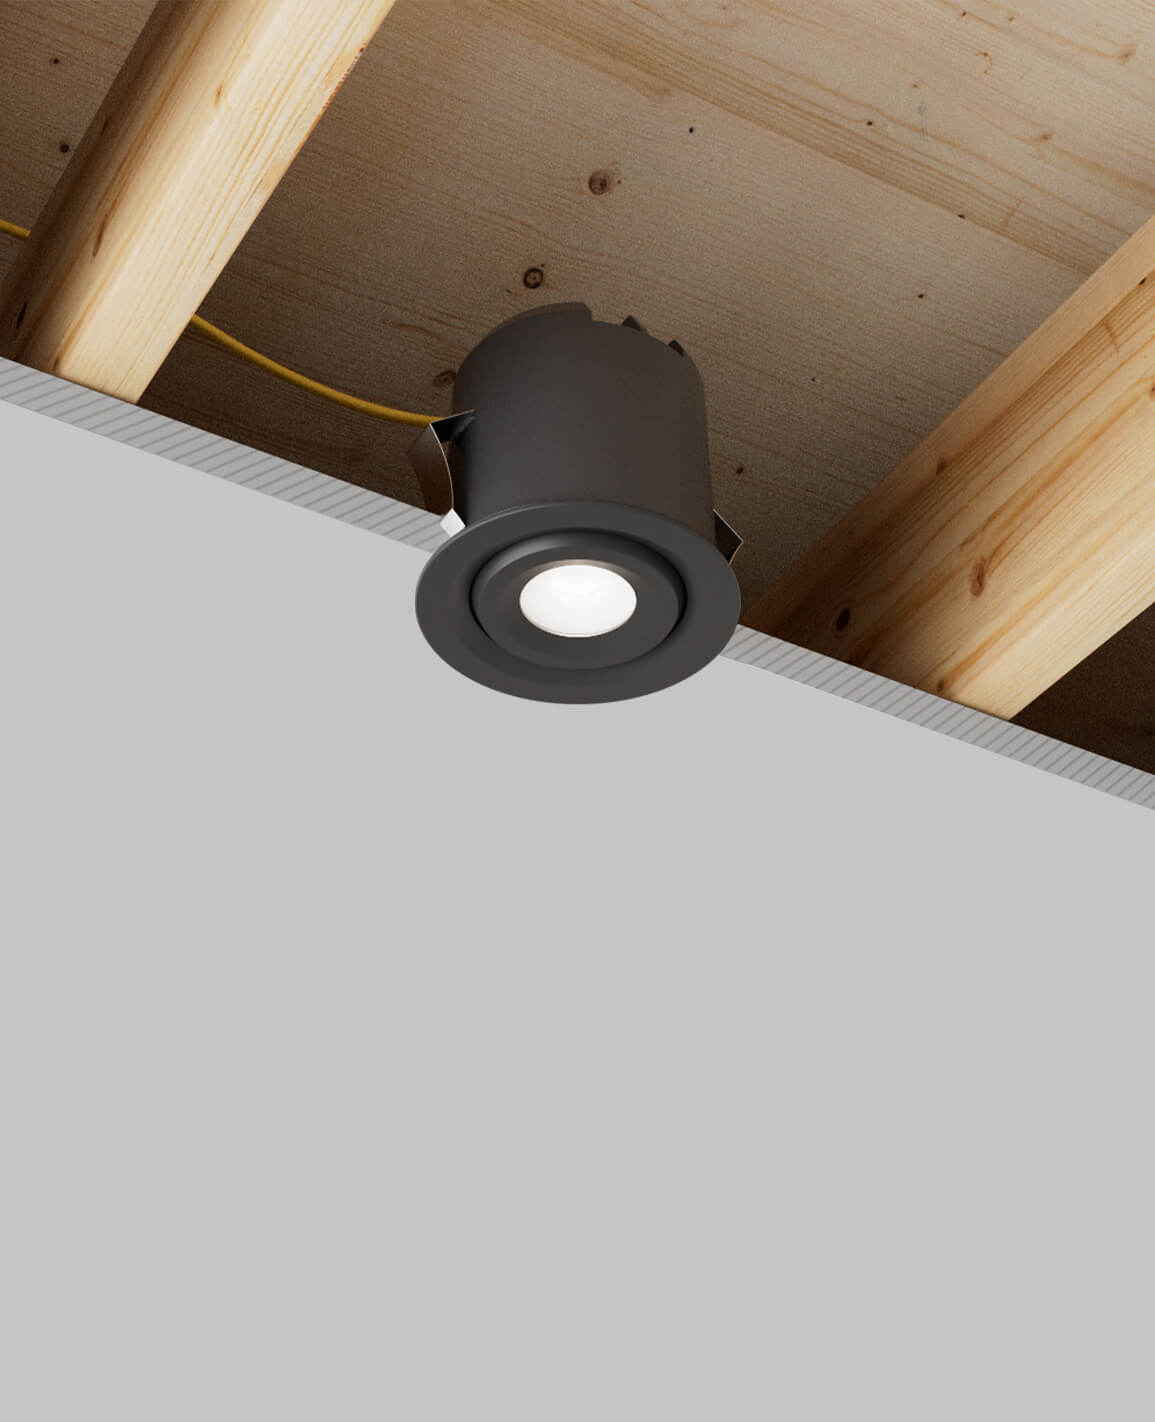 4" LUSA recessed light with remodel housing and black adjustable trim